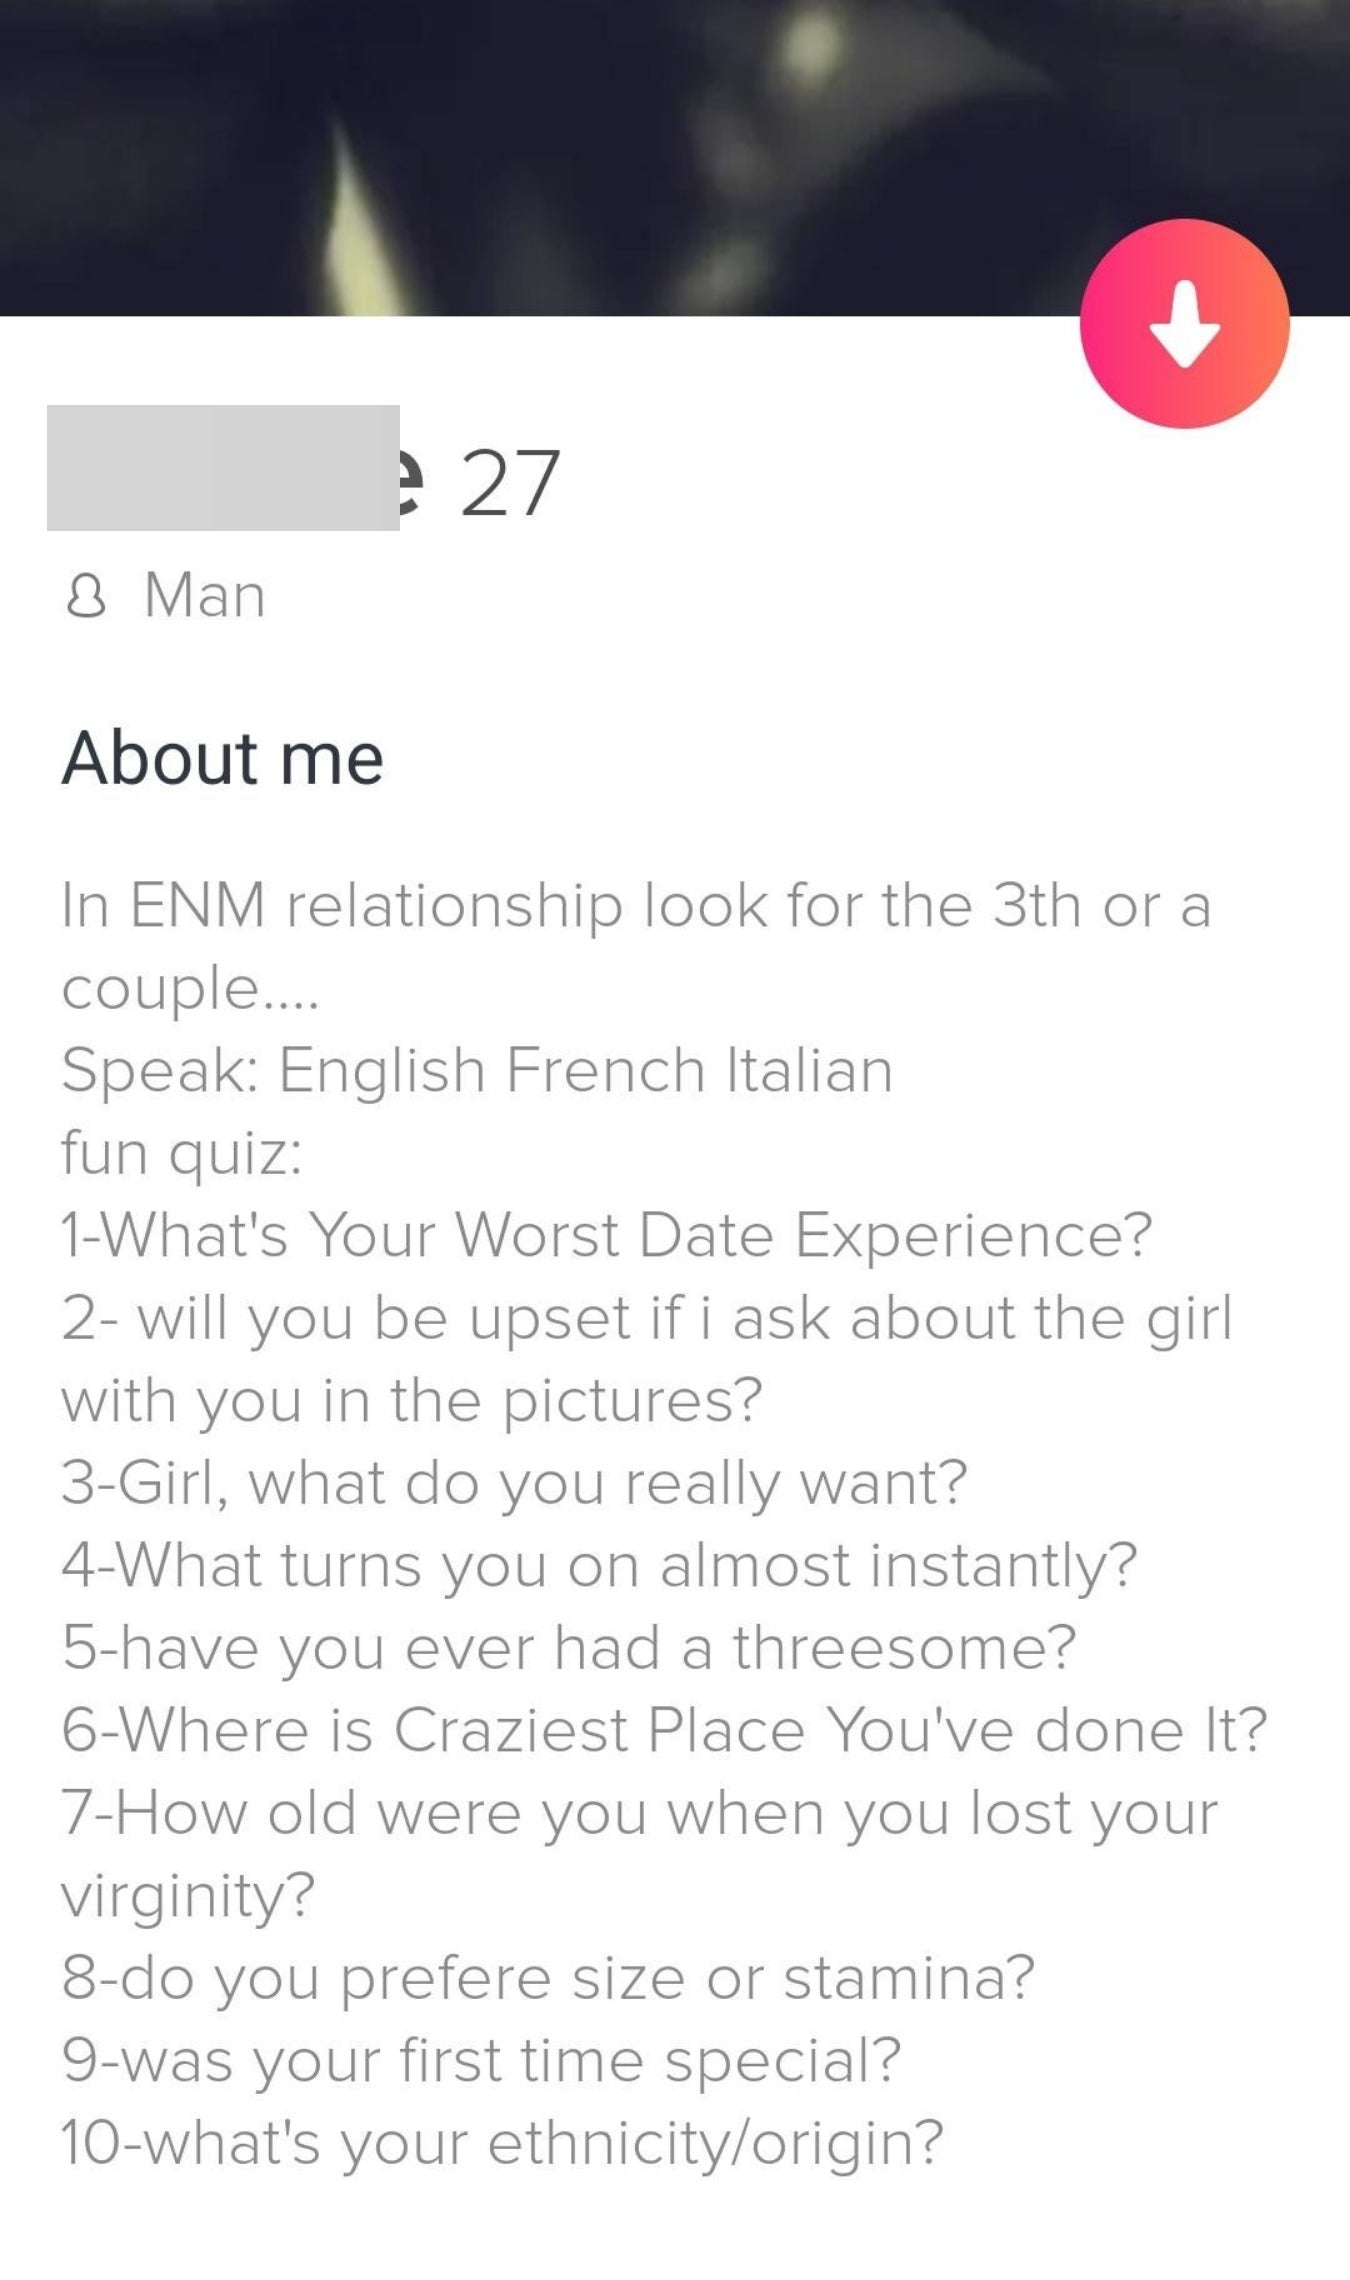 35 Times People's High Dating Standards Got Them Ridiculed Online